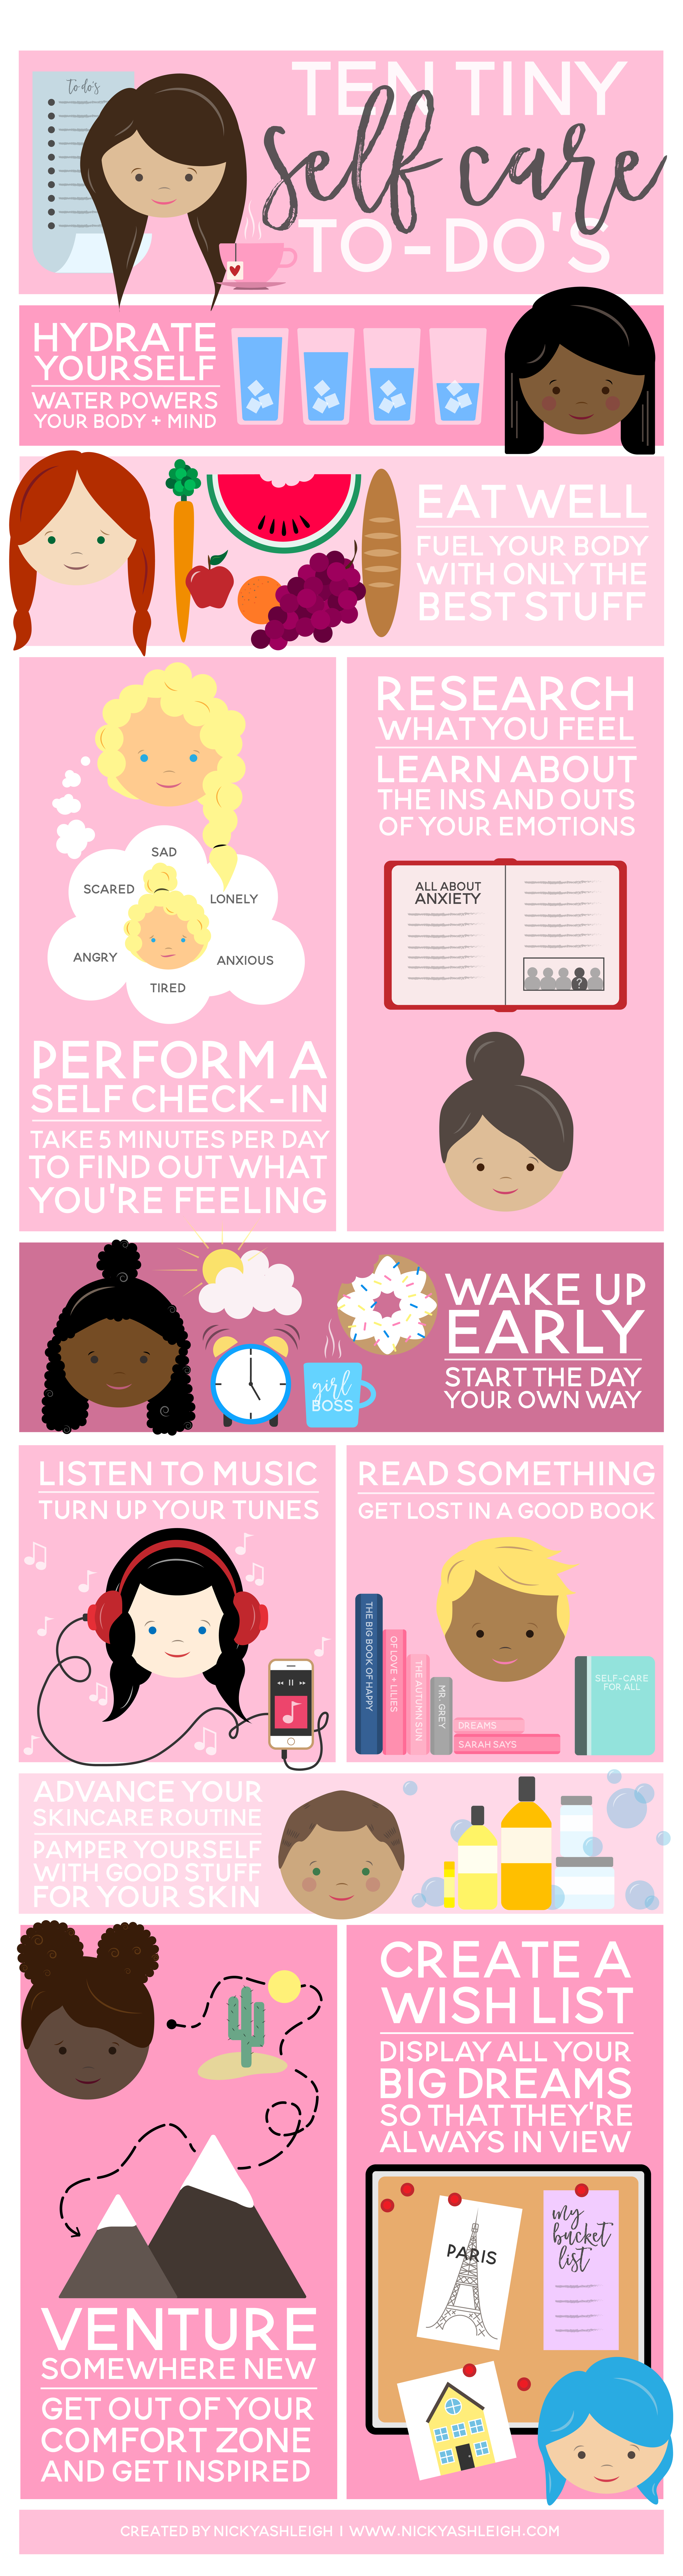 self-care-infographic